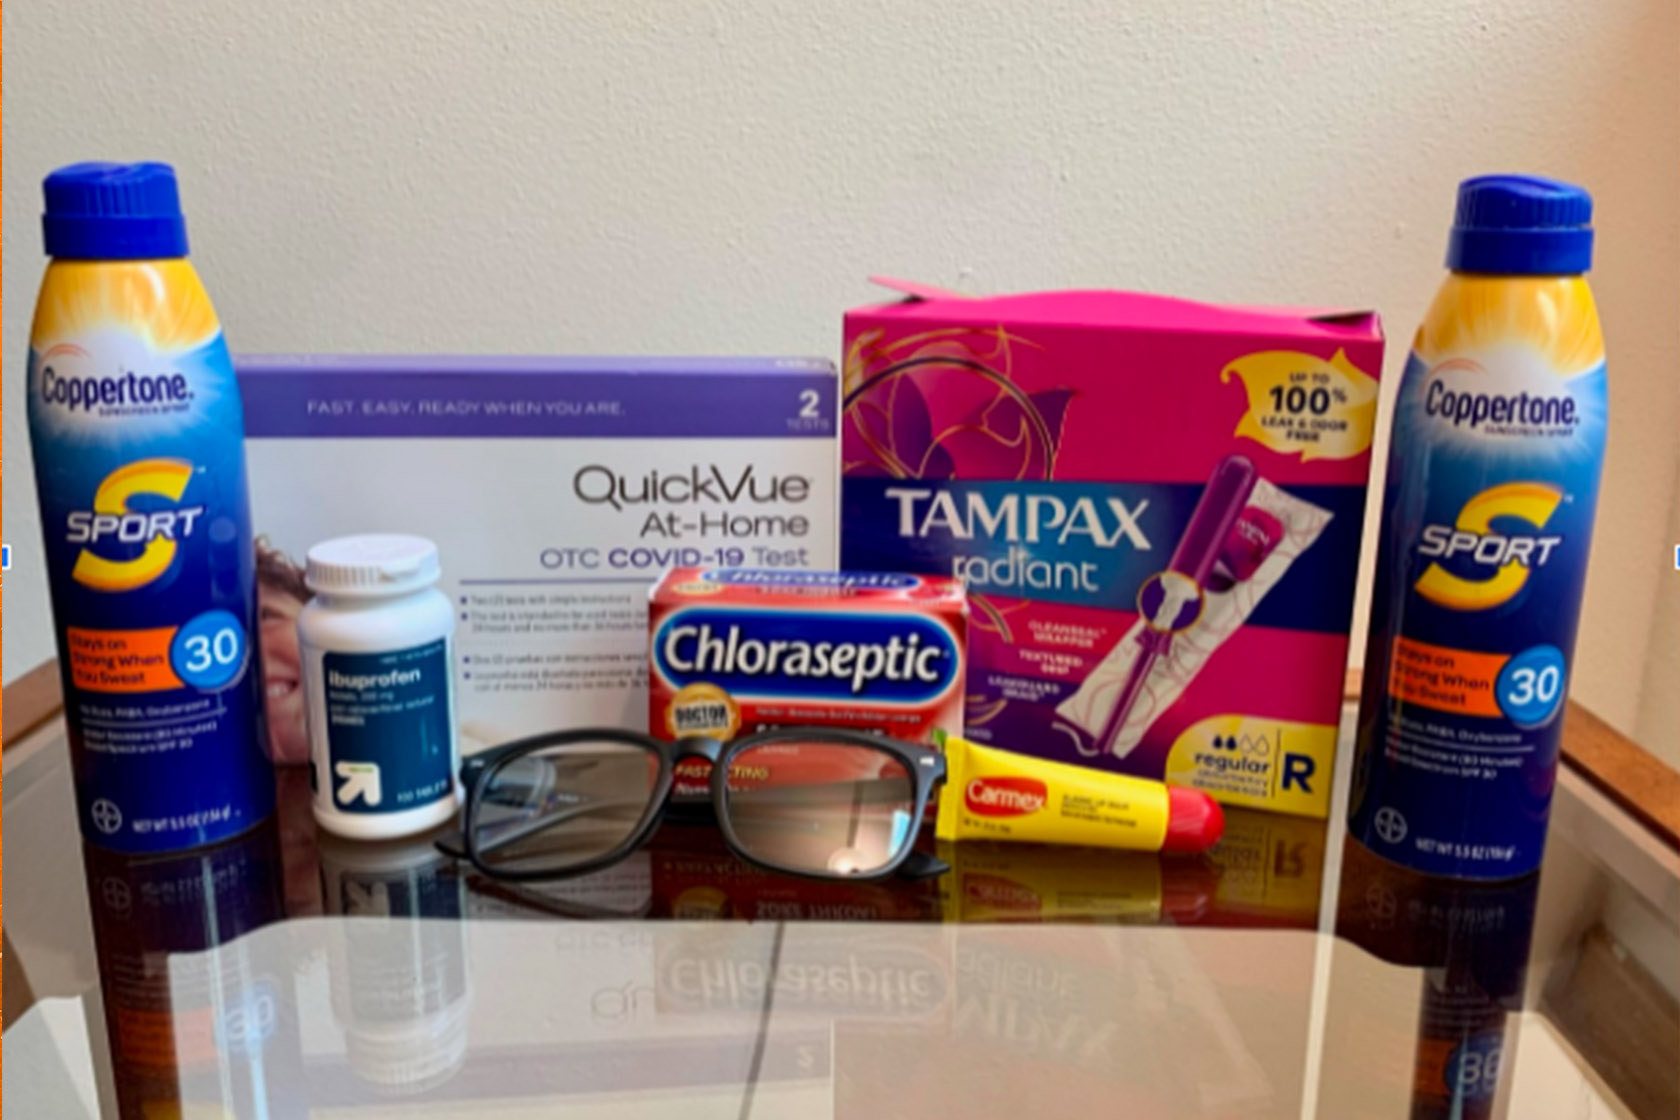 Health FSA-eligible items: OTC products (with and without a